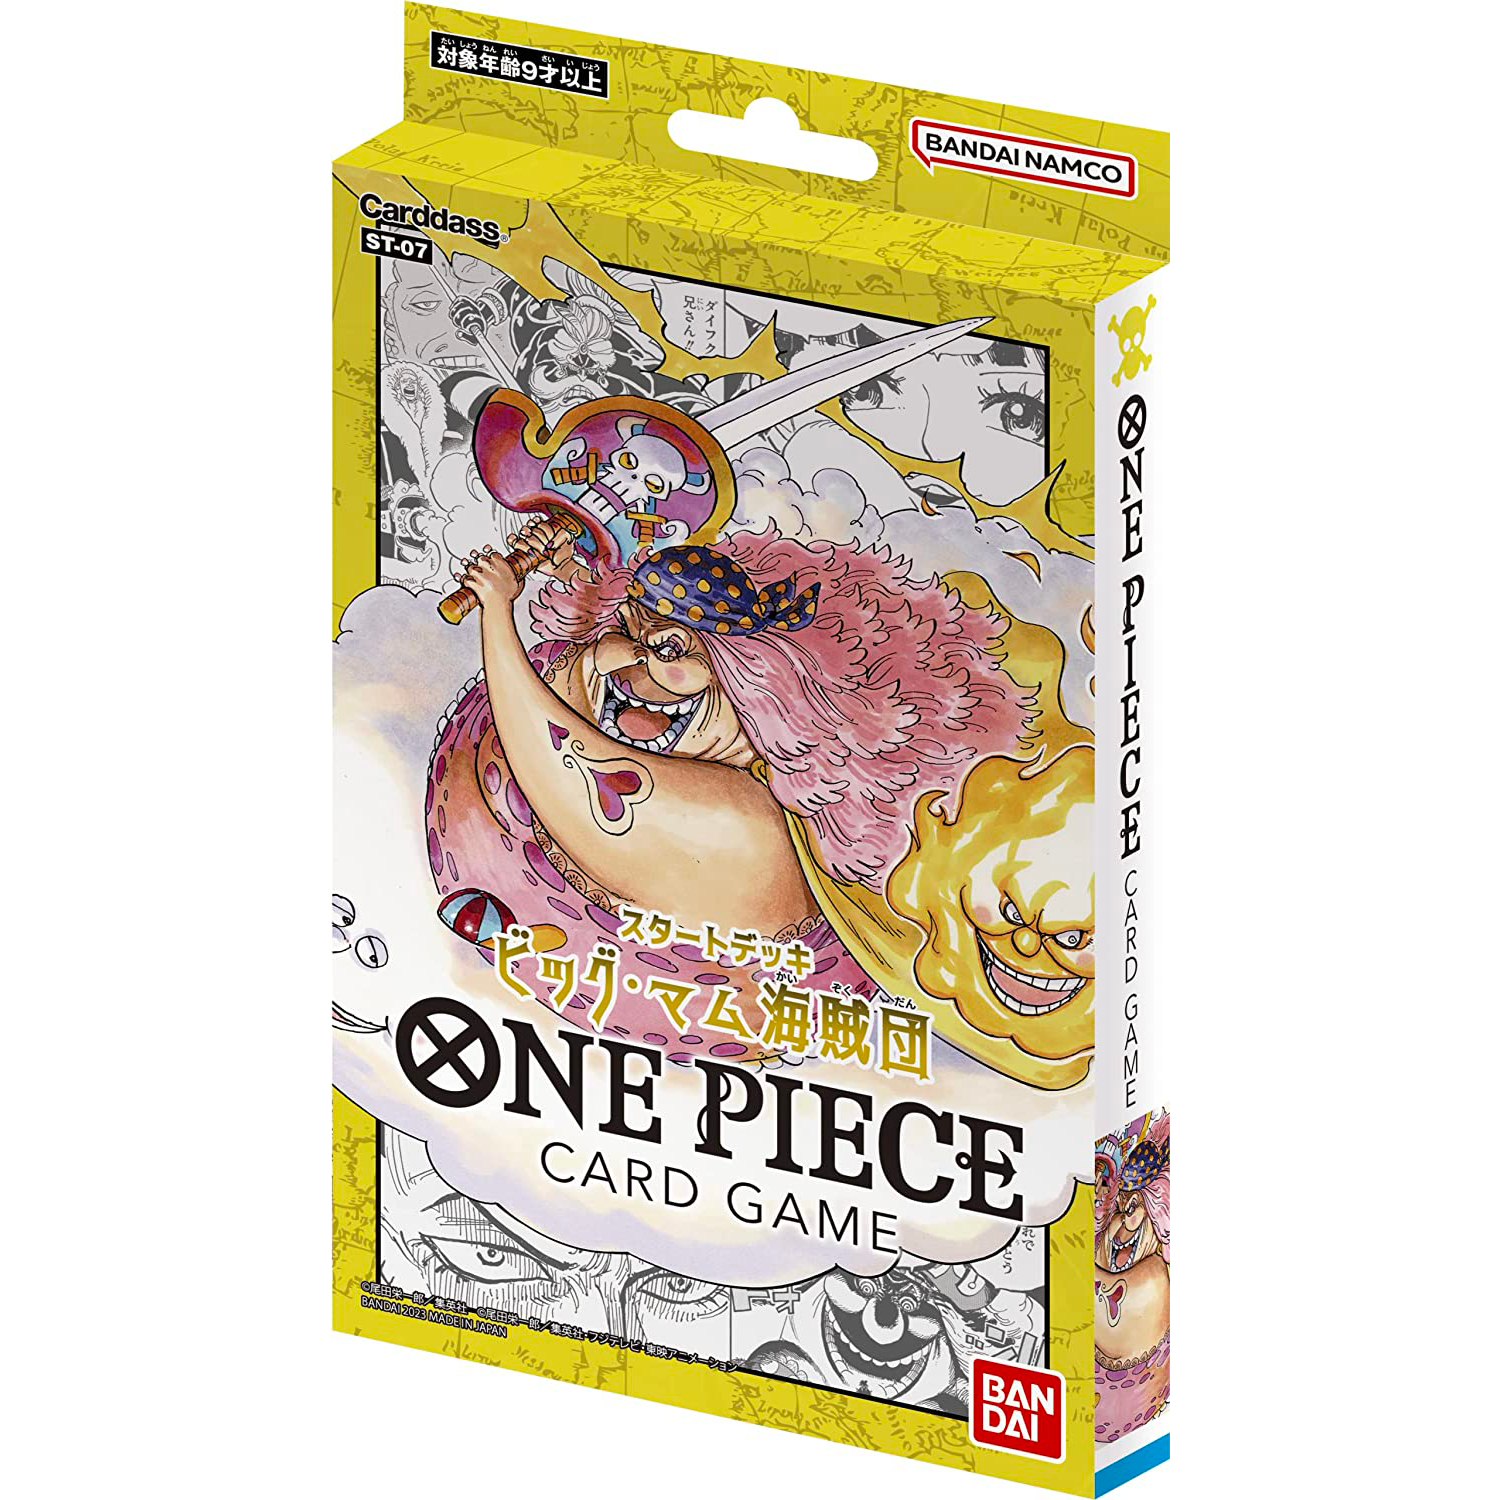 [ST-07] ONE PIECE CARD GAME STARTER DECK Big Mom Pirates  Release date: January 21 2023      Pre-built deck: 51 cards (17 types in total)     Don!! Cards: 10     Play sheet: 1 sheet      Leader card: 1 type     Super rare: 2 types     Common: 14 types